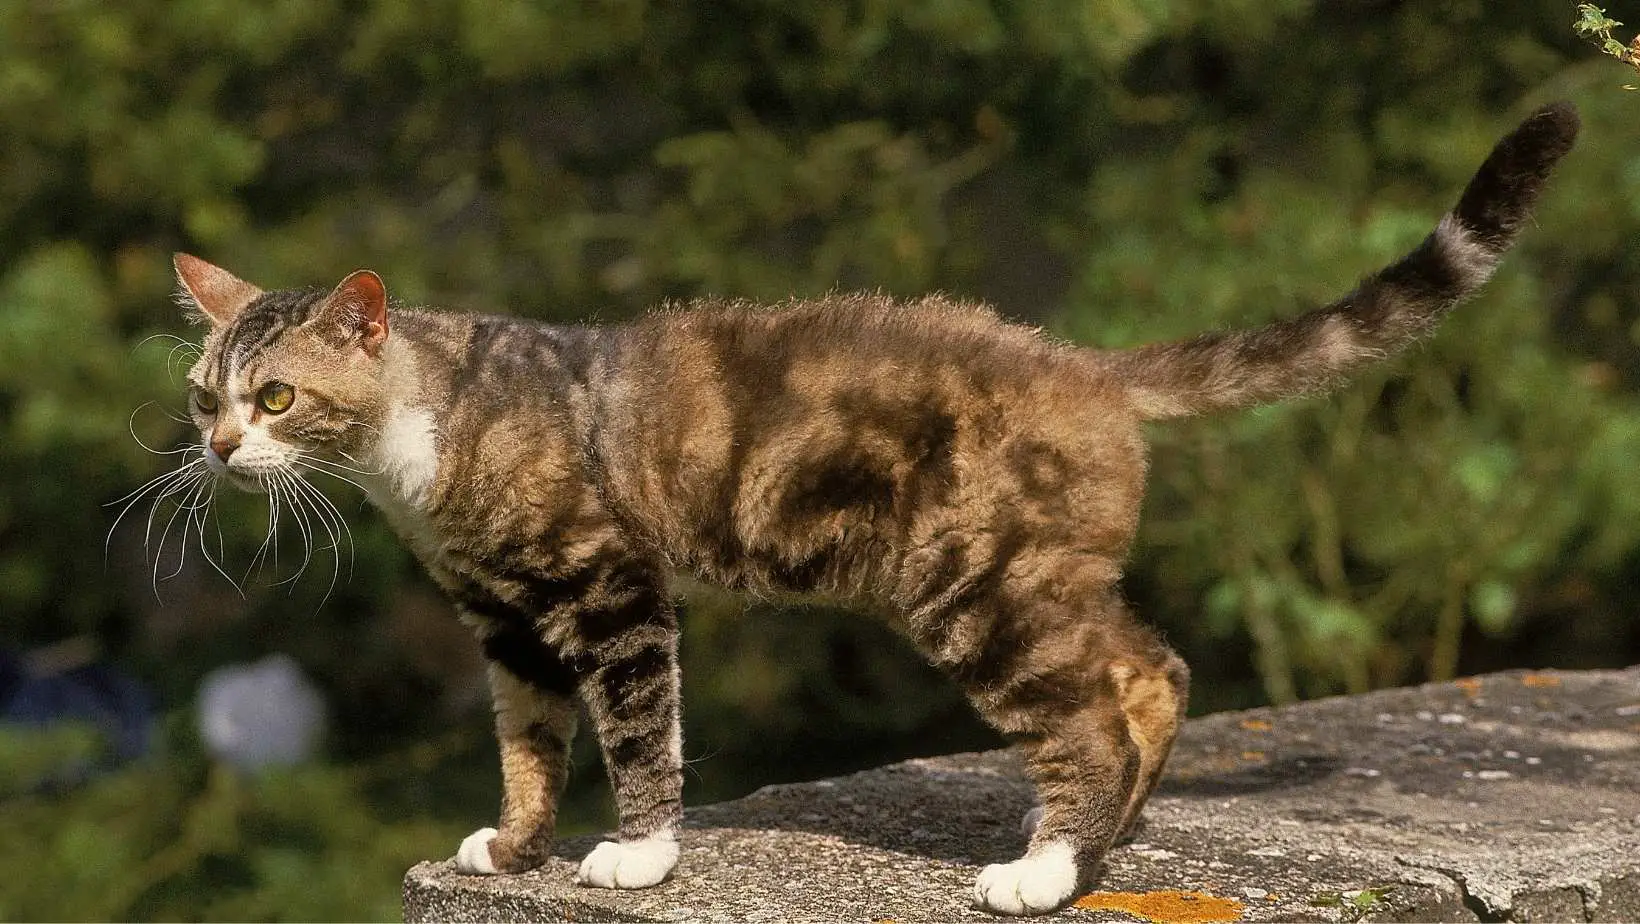 American Wirehair Cat Breed